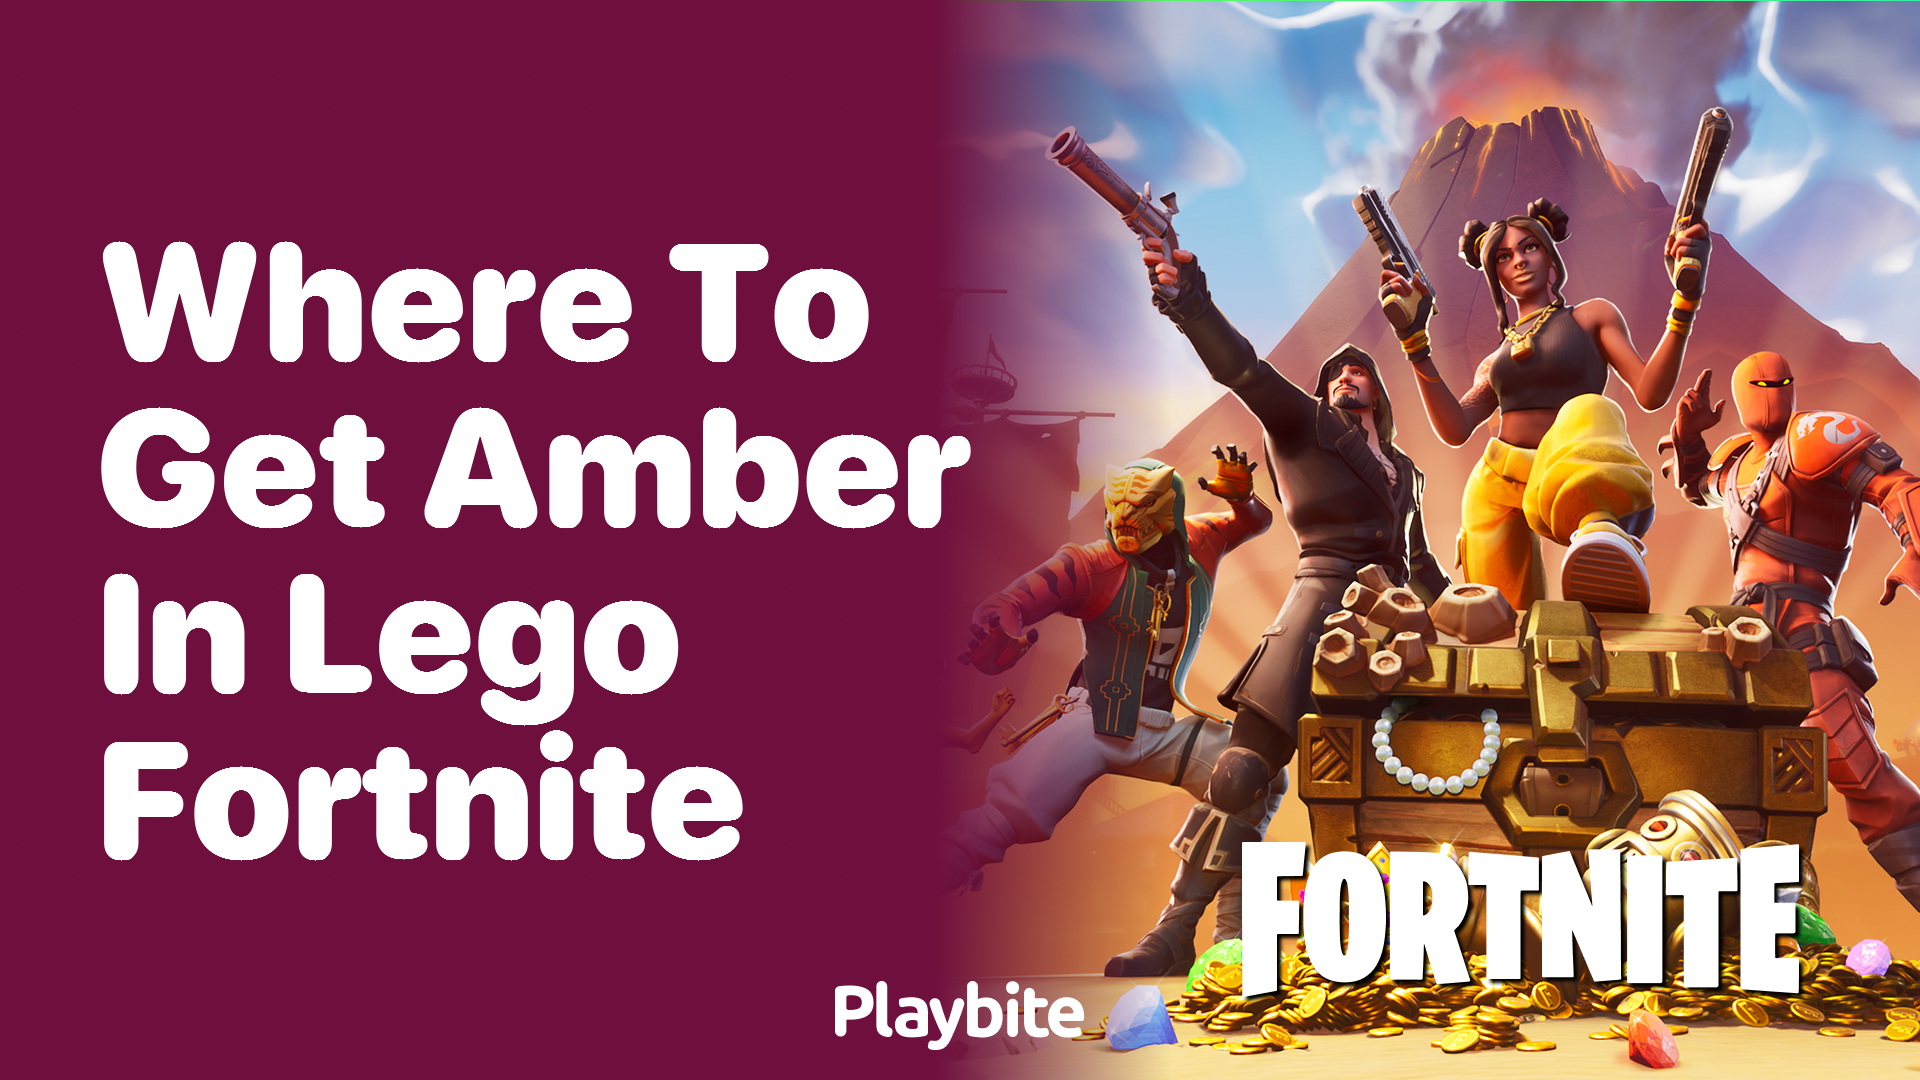 Where to Get Amber in Lego Fortnite: A Quick Guide